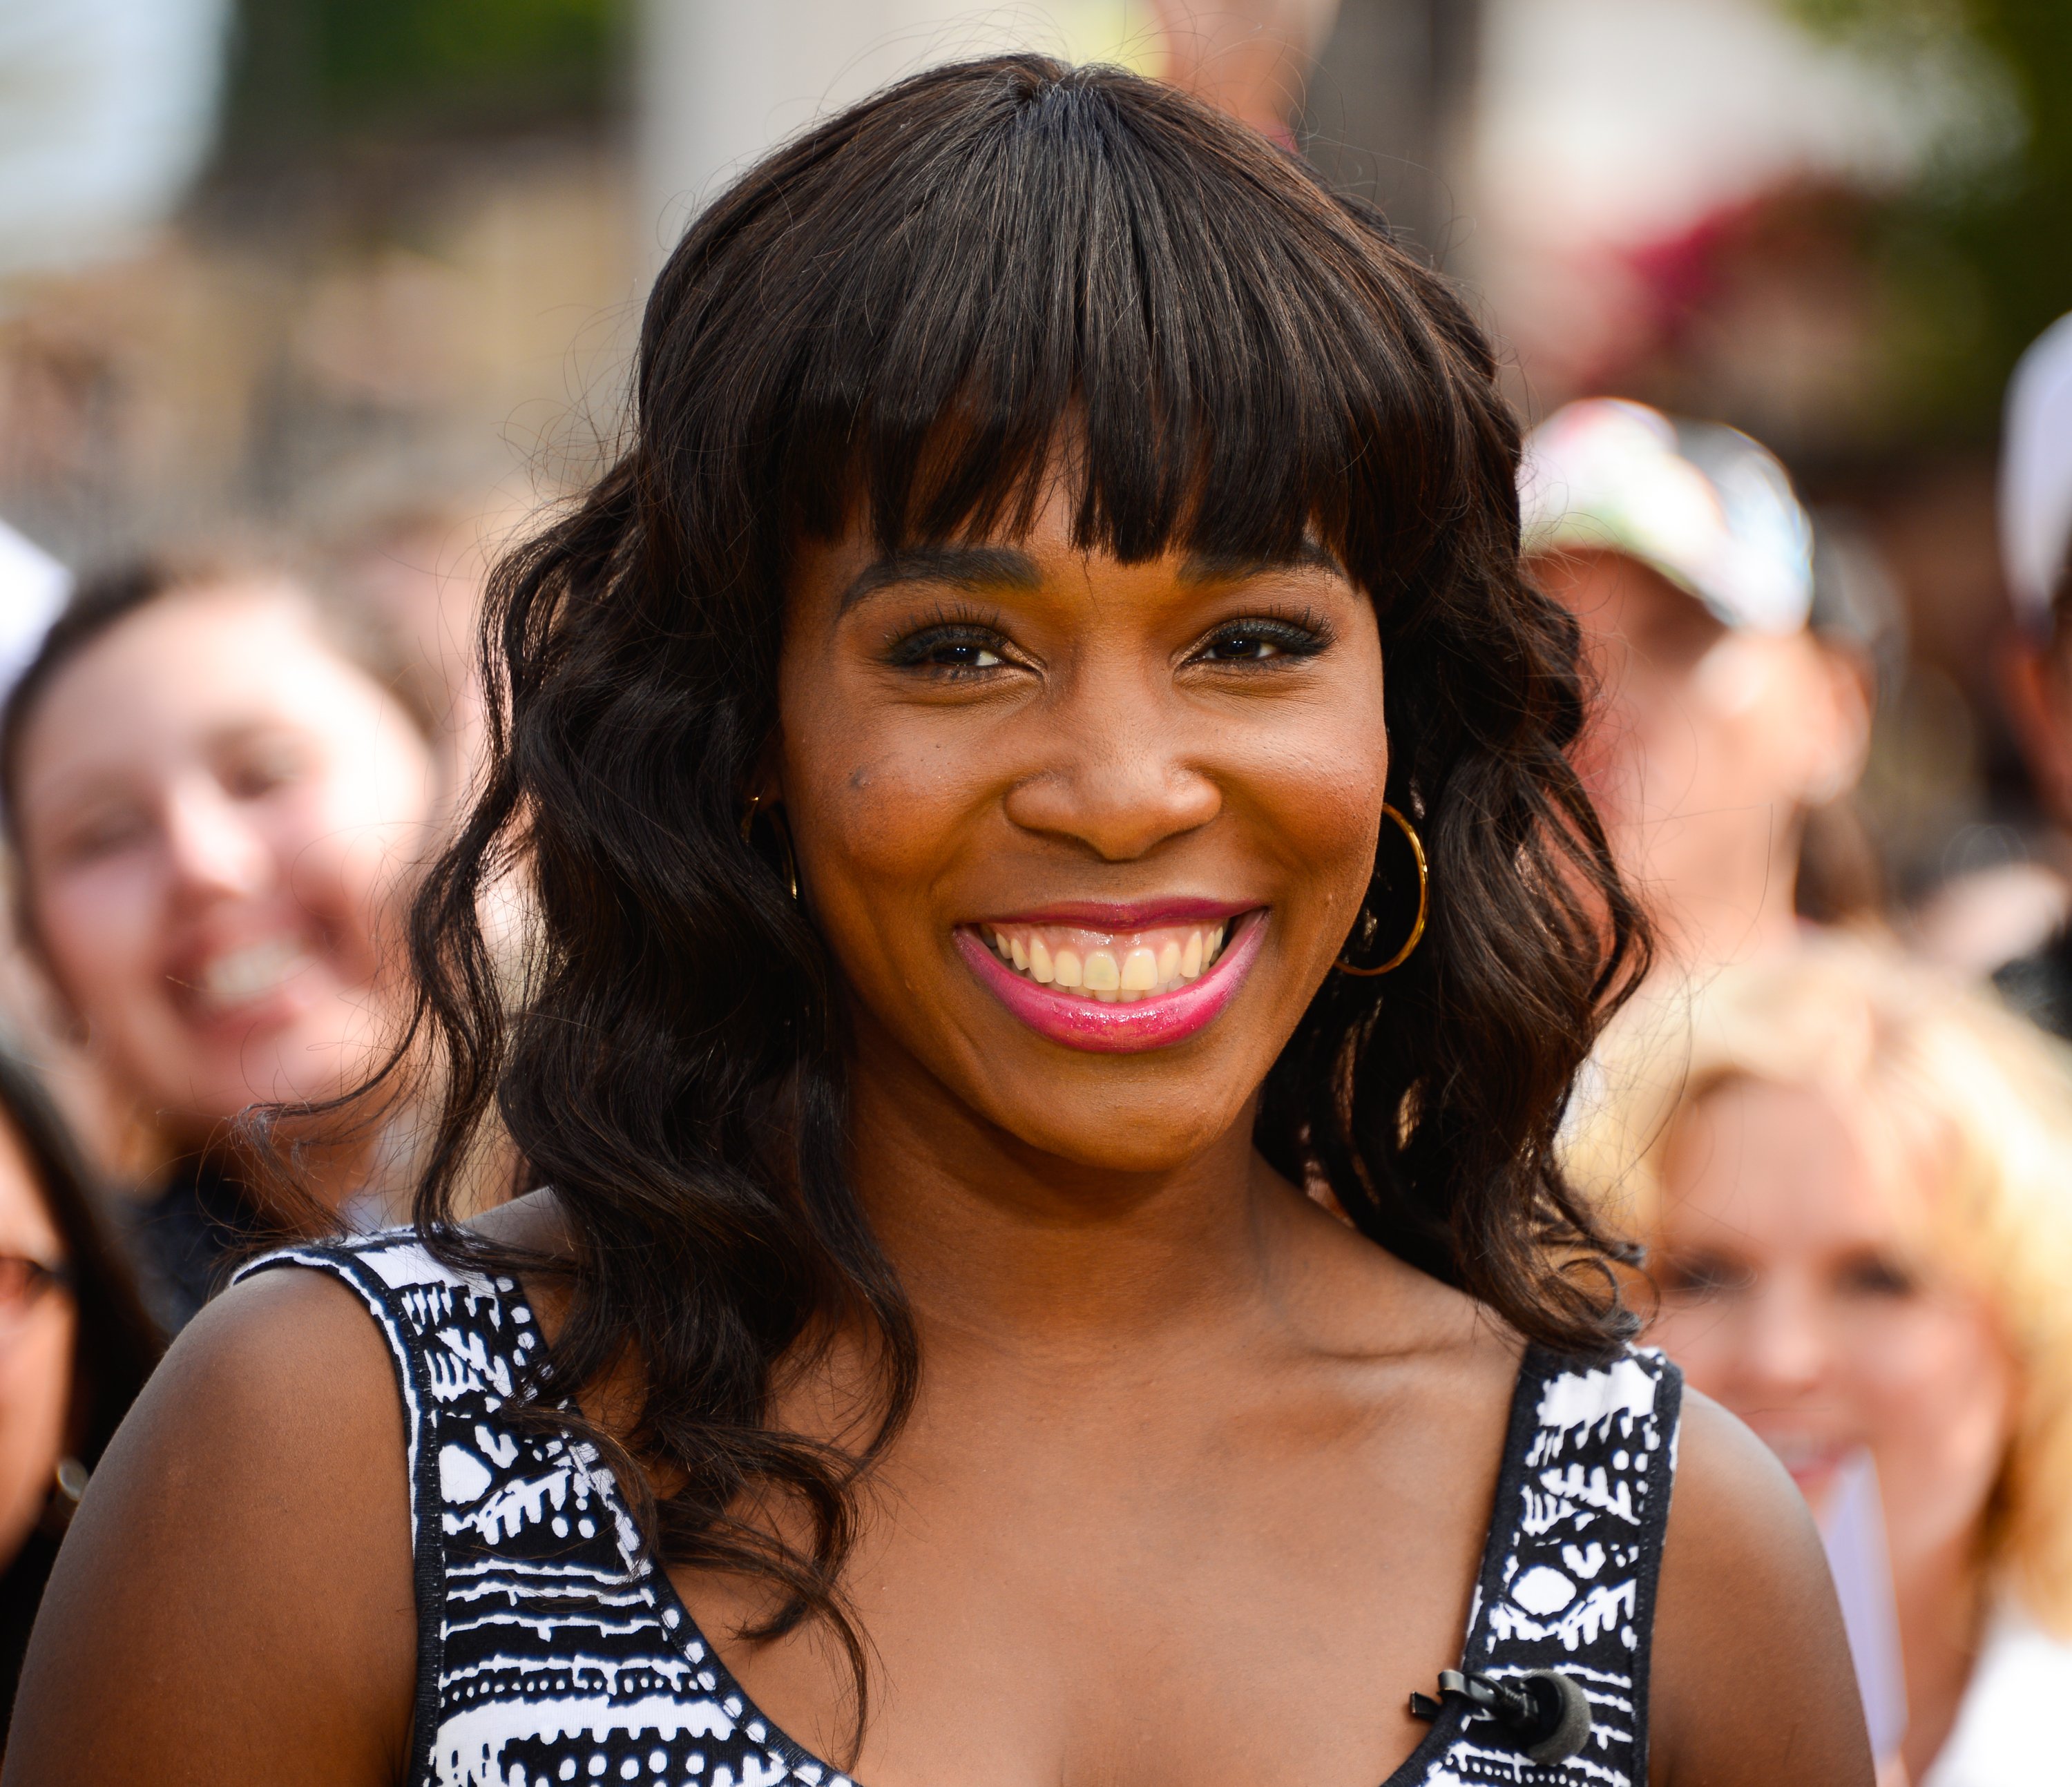 Venus Williams at Universal Studios Hollywood on April 22, 2014 in Universal City, California. | Source: Getty Images